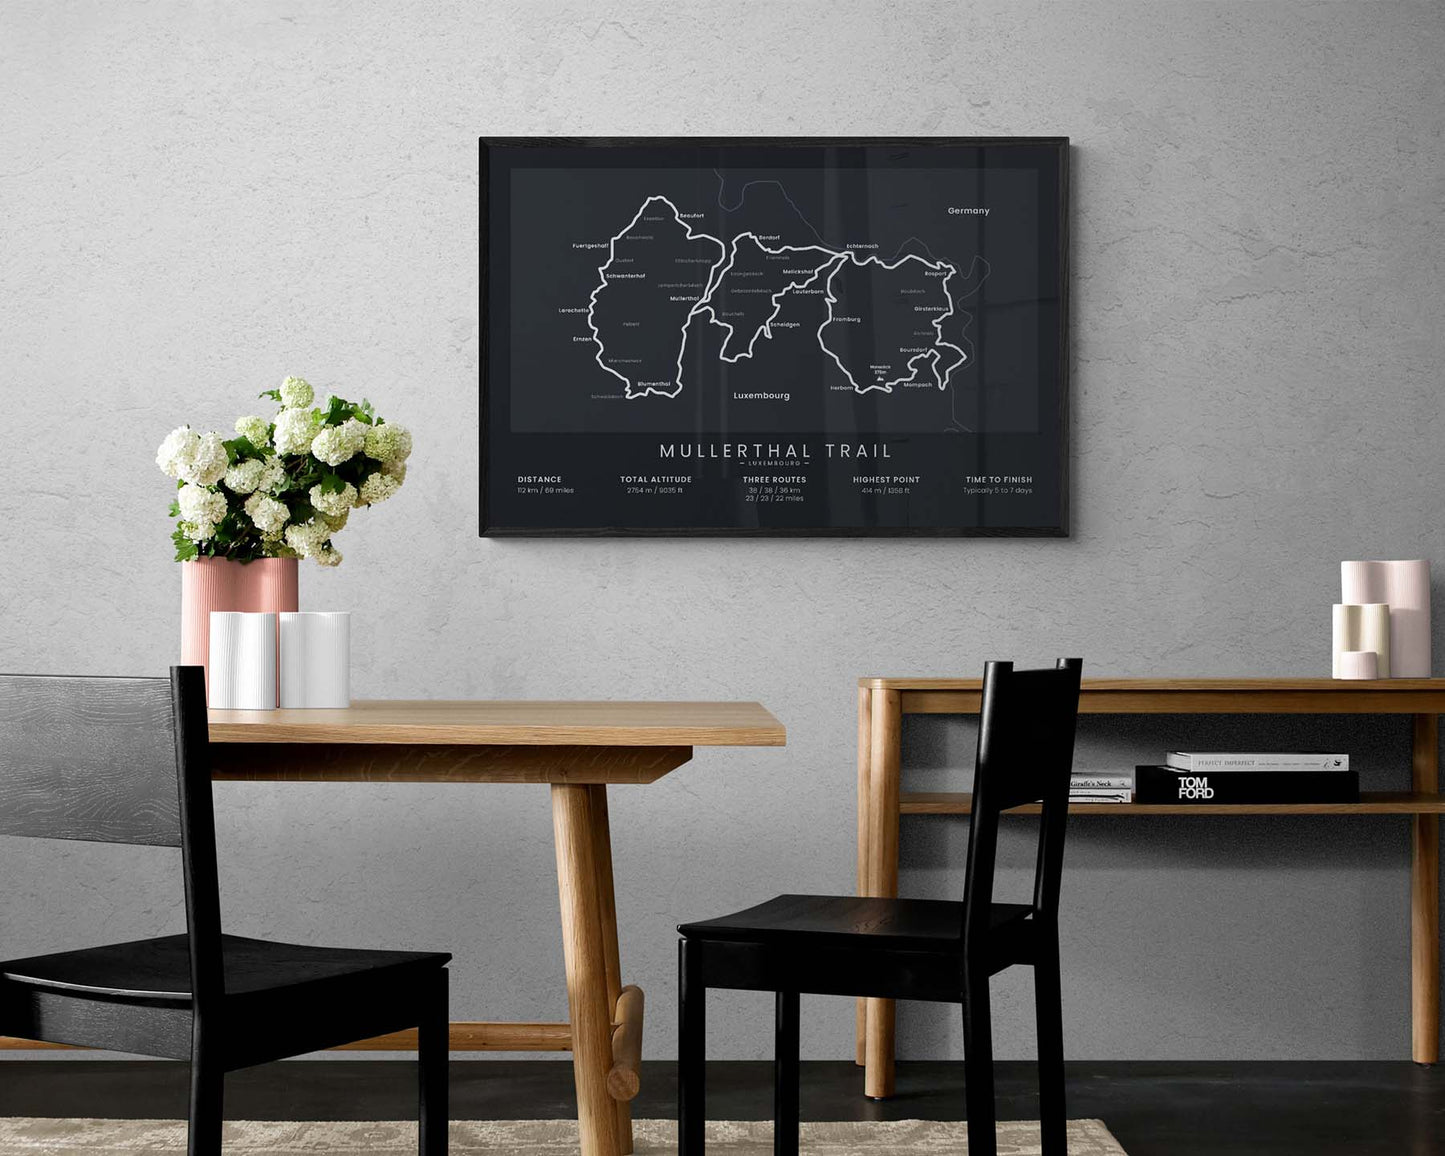 Mullerthal Trail (Luxembourg's Little Switzerland) Route Wall Art in Minimal Room Decor